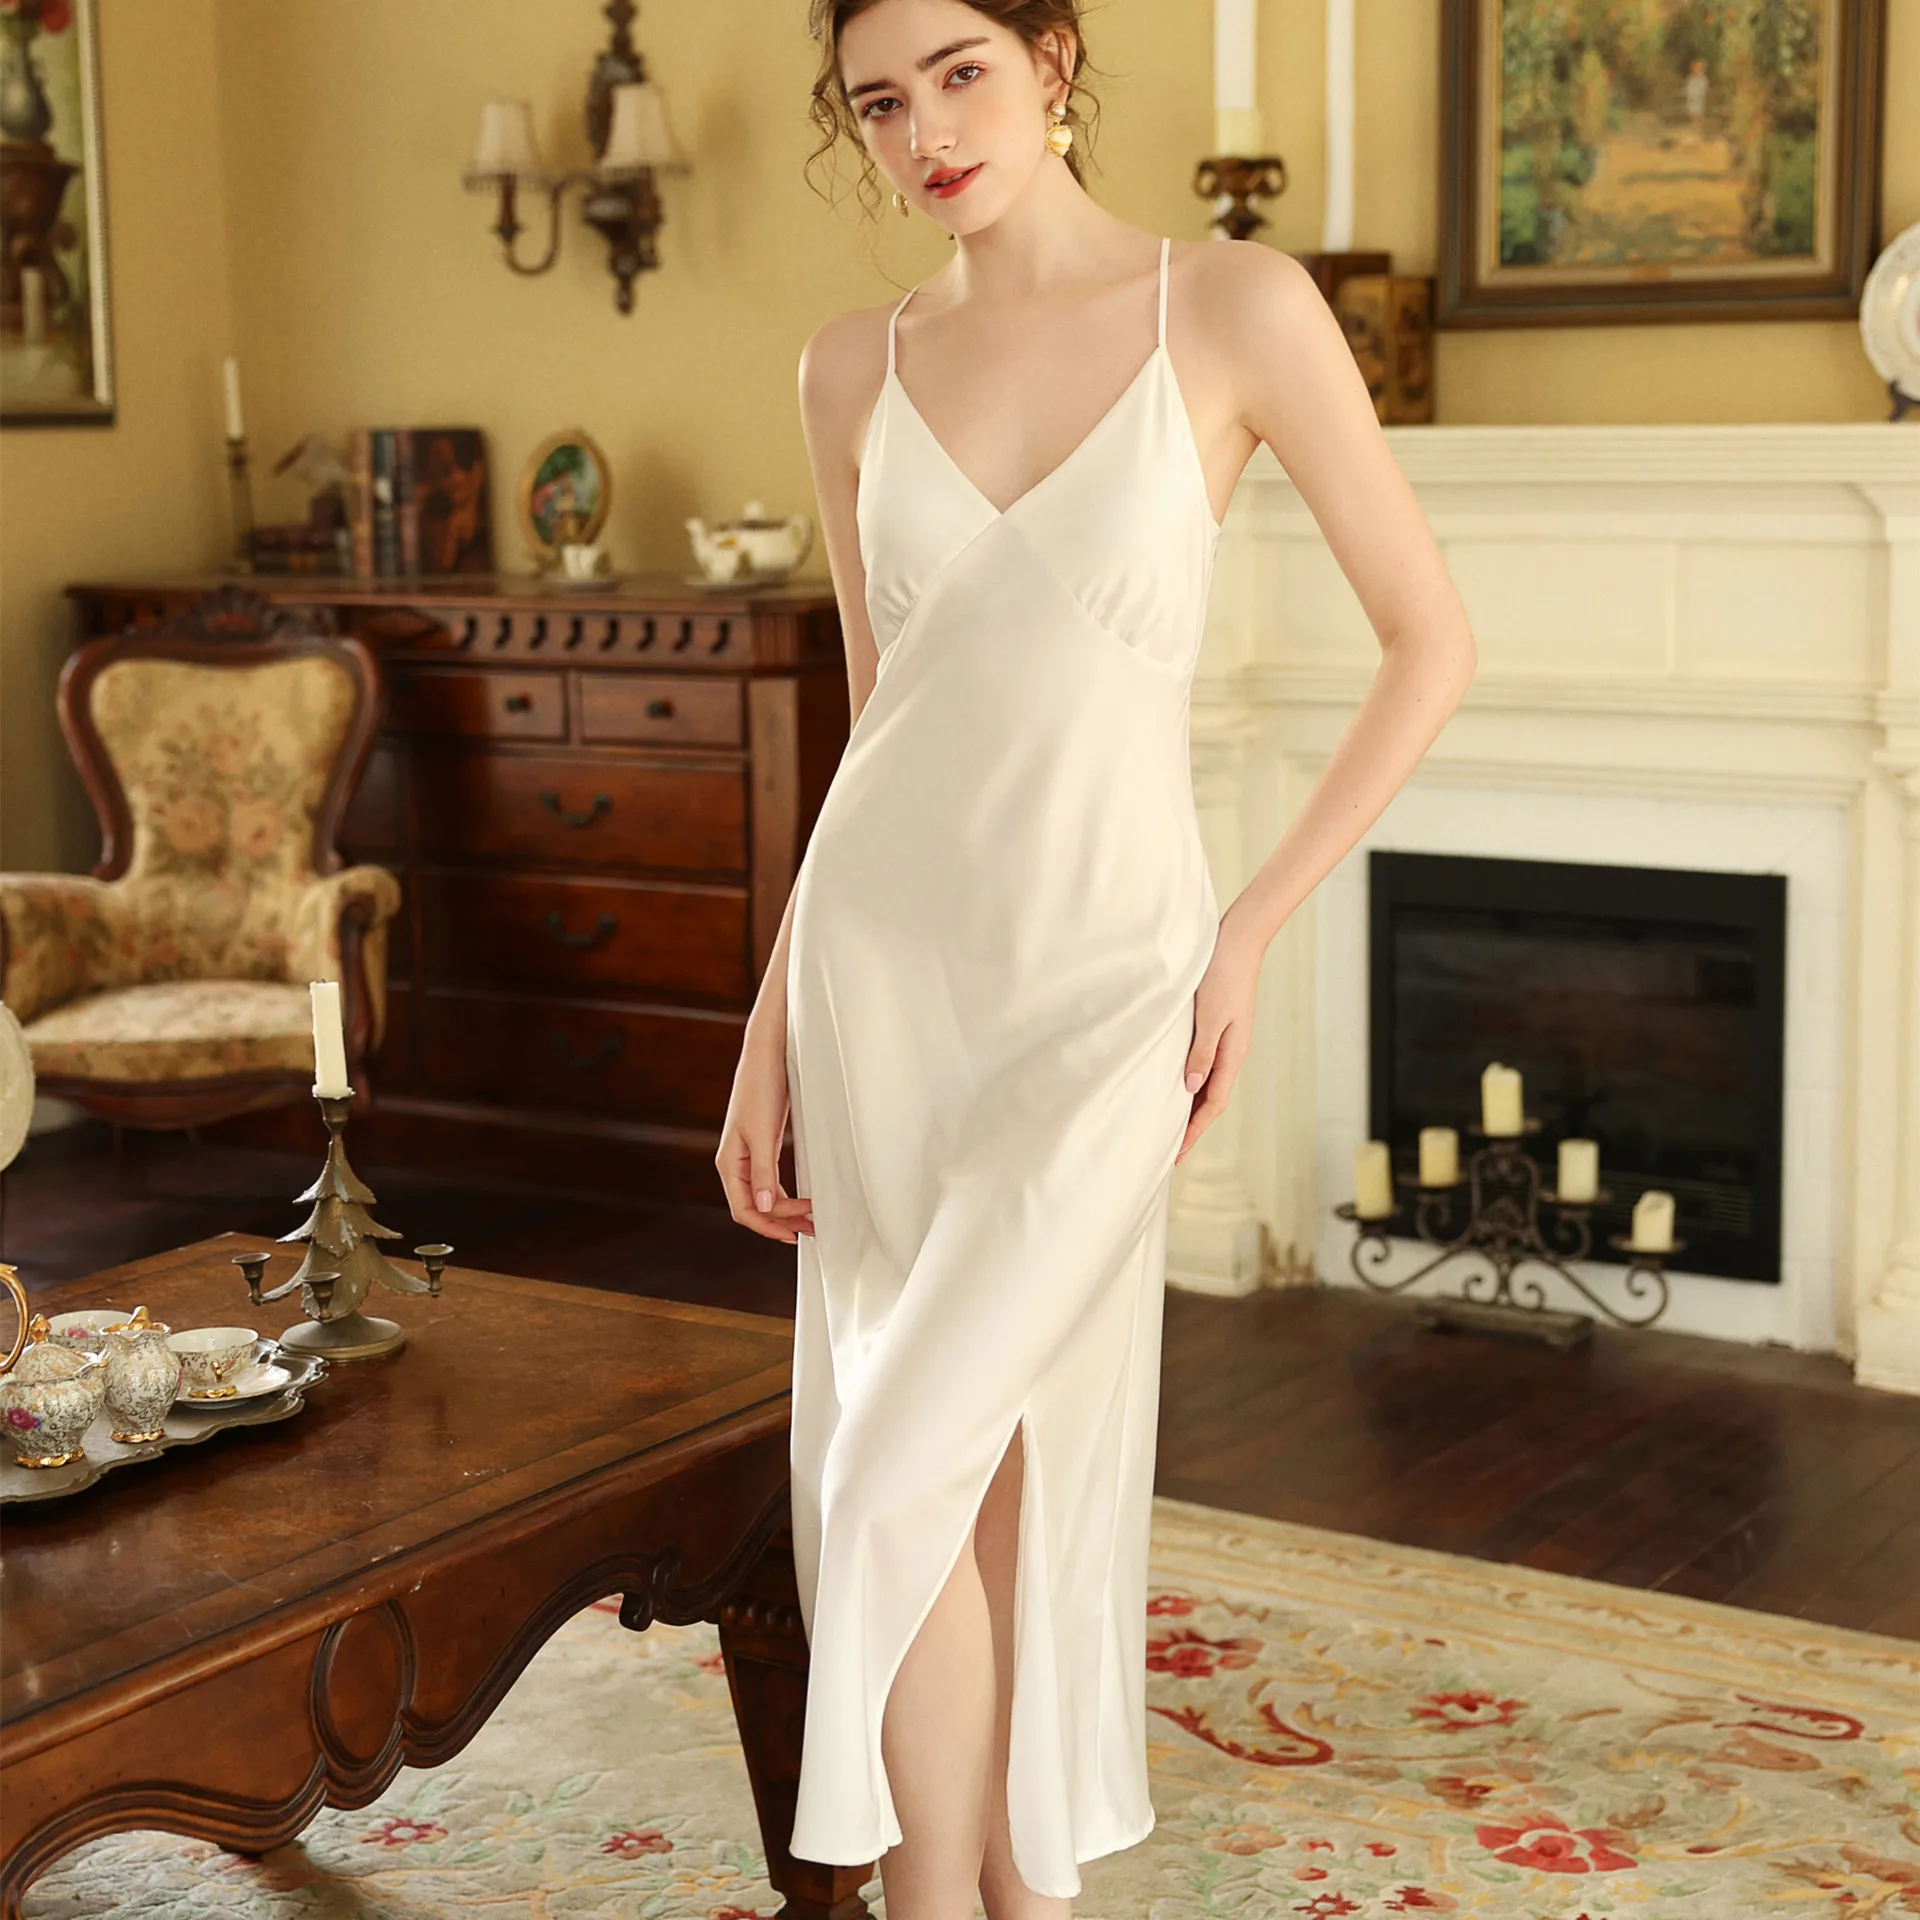 

Summer New Nightdress White Lady Nightwear Nightgown Satin Spaghetti Straps Skirt Intimate Lingerie Sexy Home Clothes Bathrobe